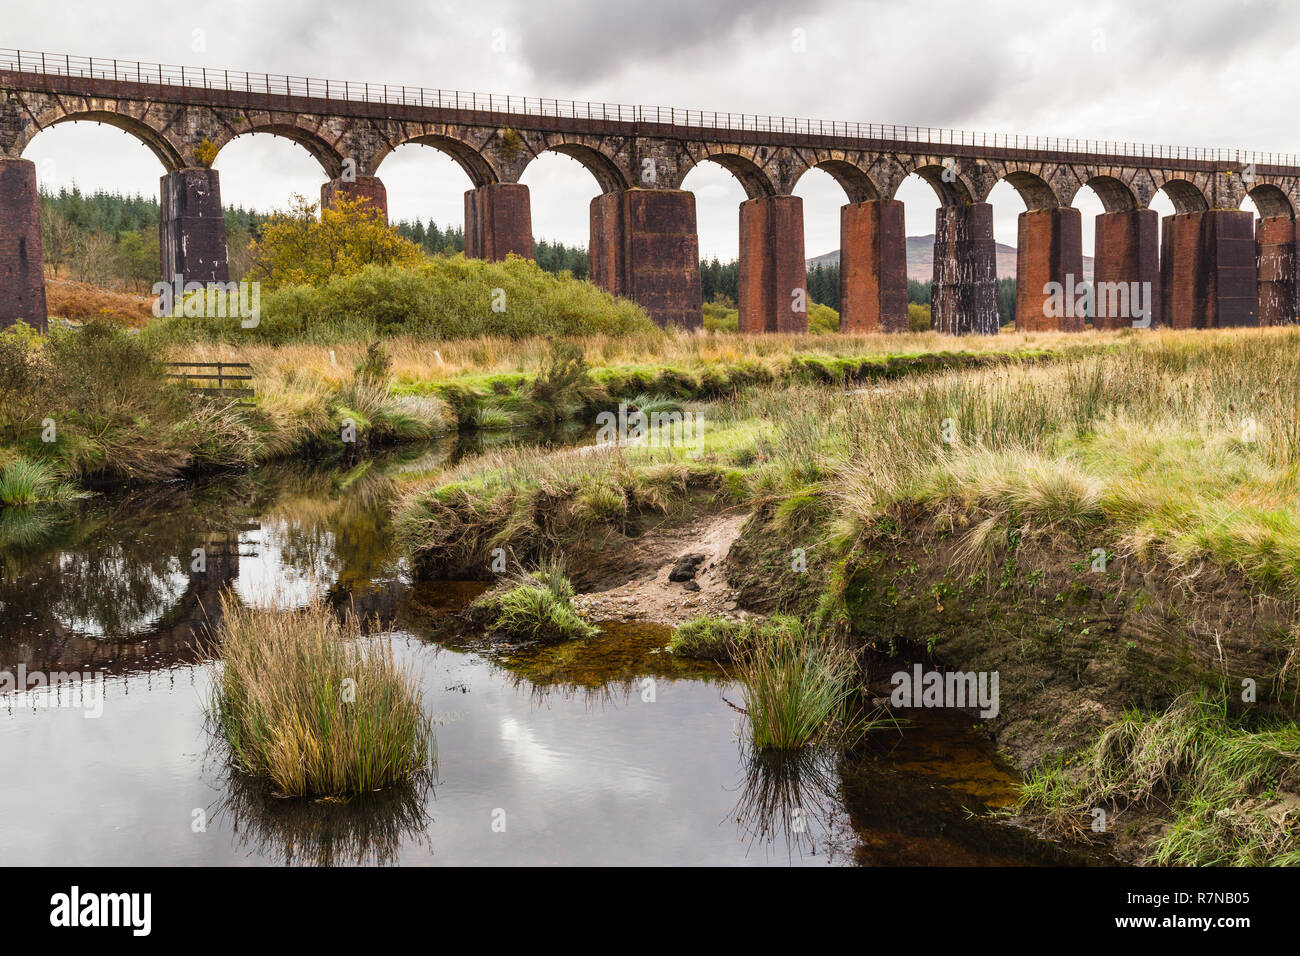 Big Water of Fleet is a 300-yard railway viaduct, with 20 arches. The piers were strengthened with brick encasings in 1940. The line it carried closed Stock Photo